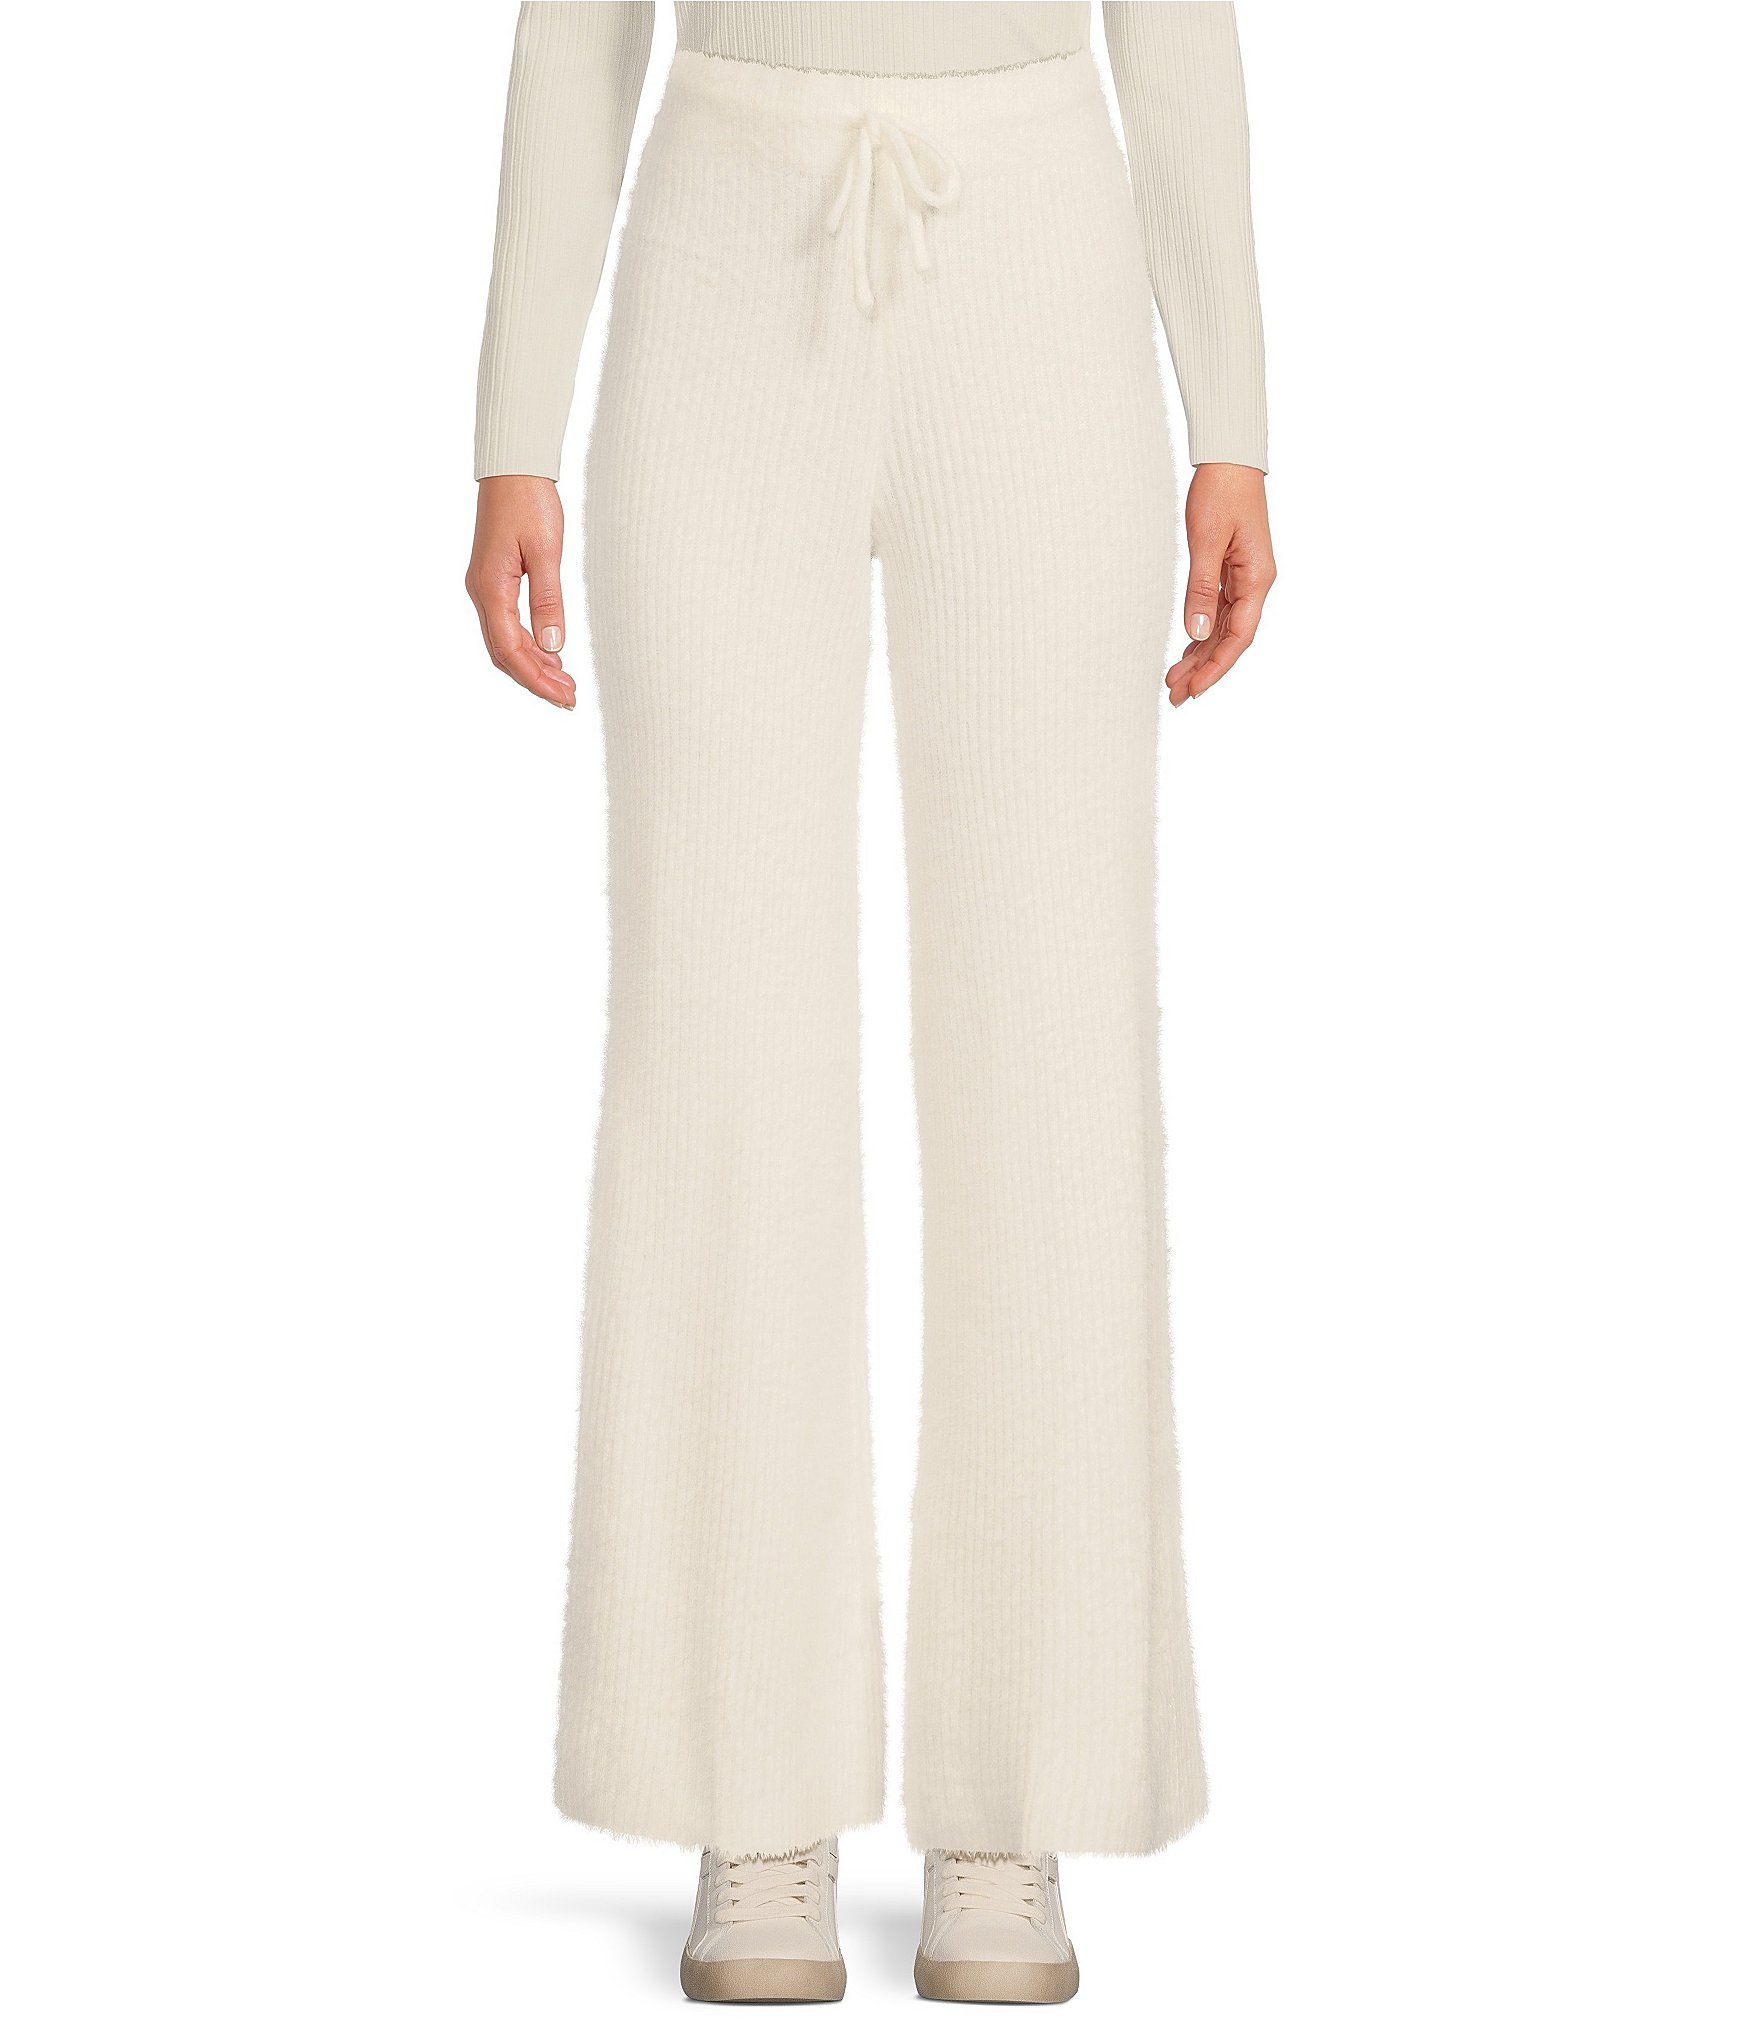 Staying Cozy Ivory Ribbed Knit Wide-Leg Sweater Pants  Sweater pants, Knit  pants outfit, Thanksgiving outfit